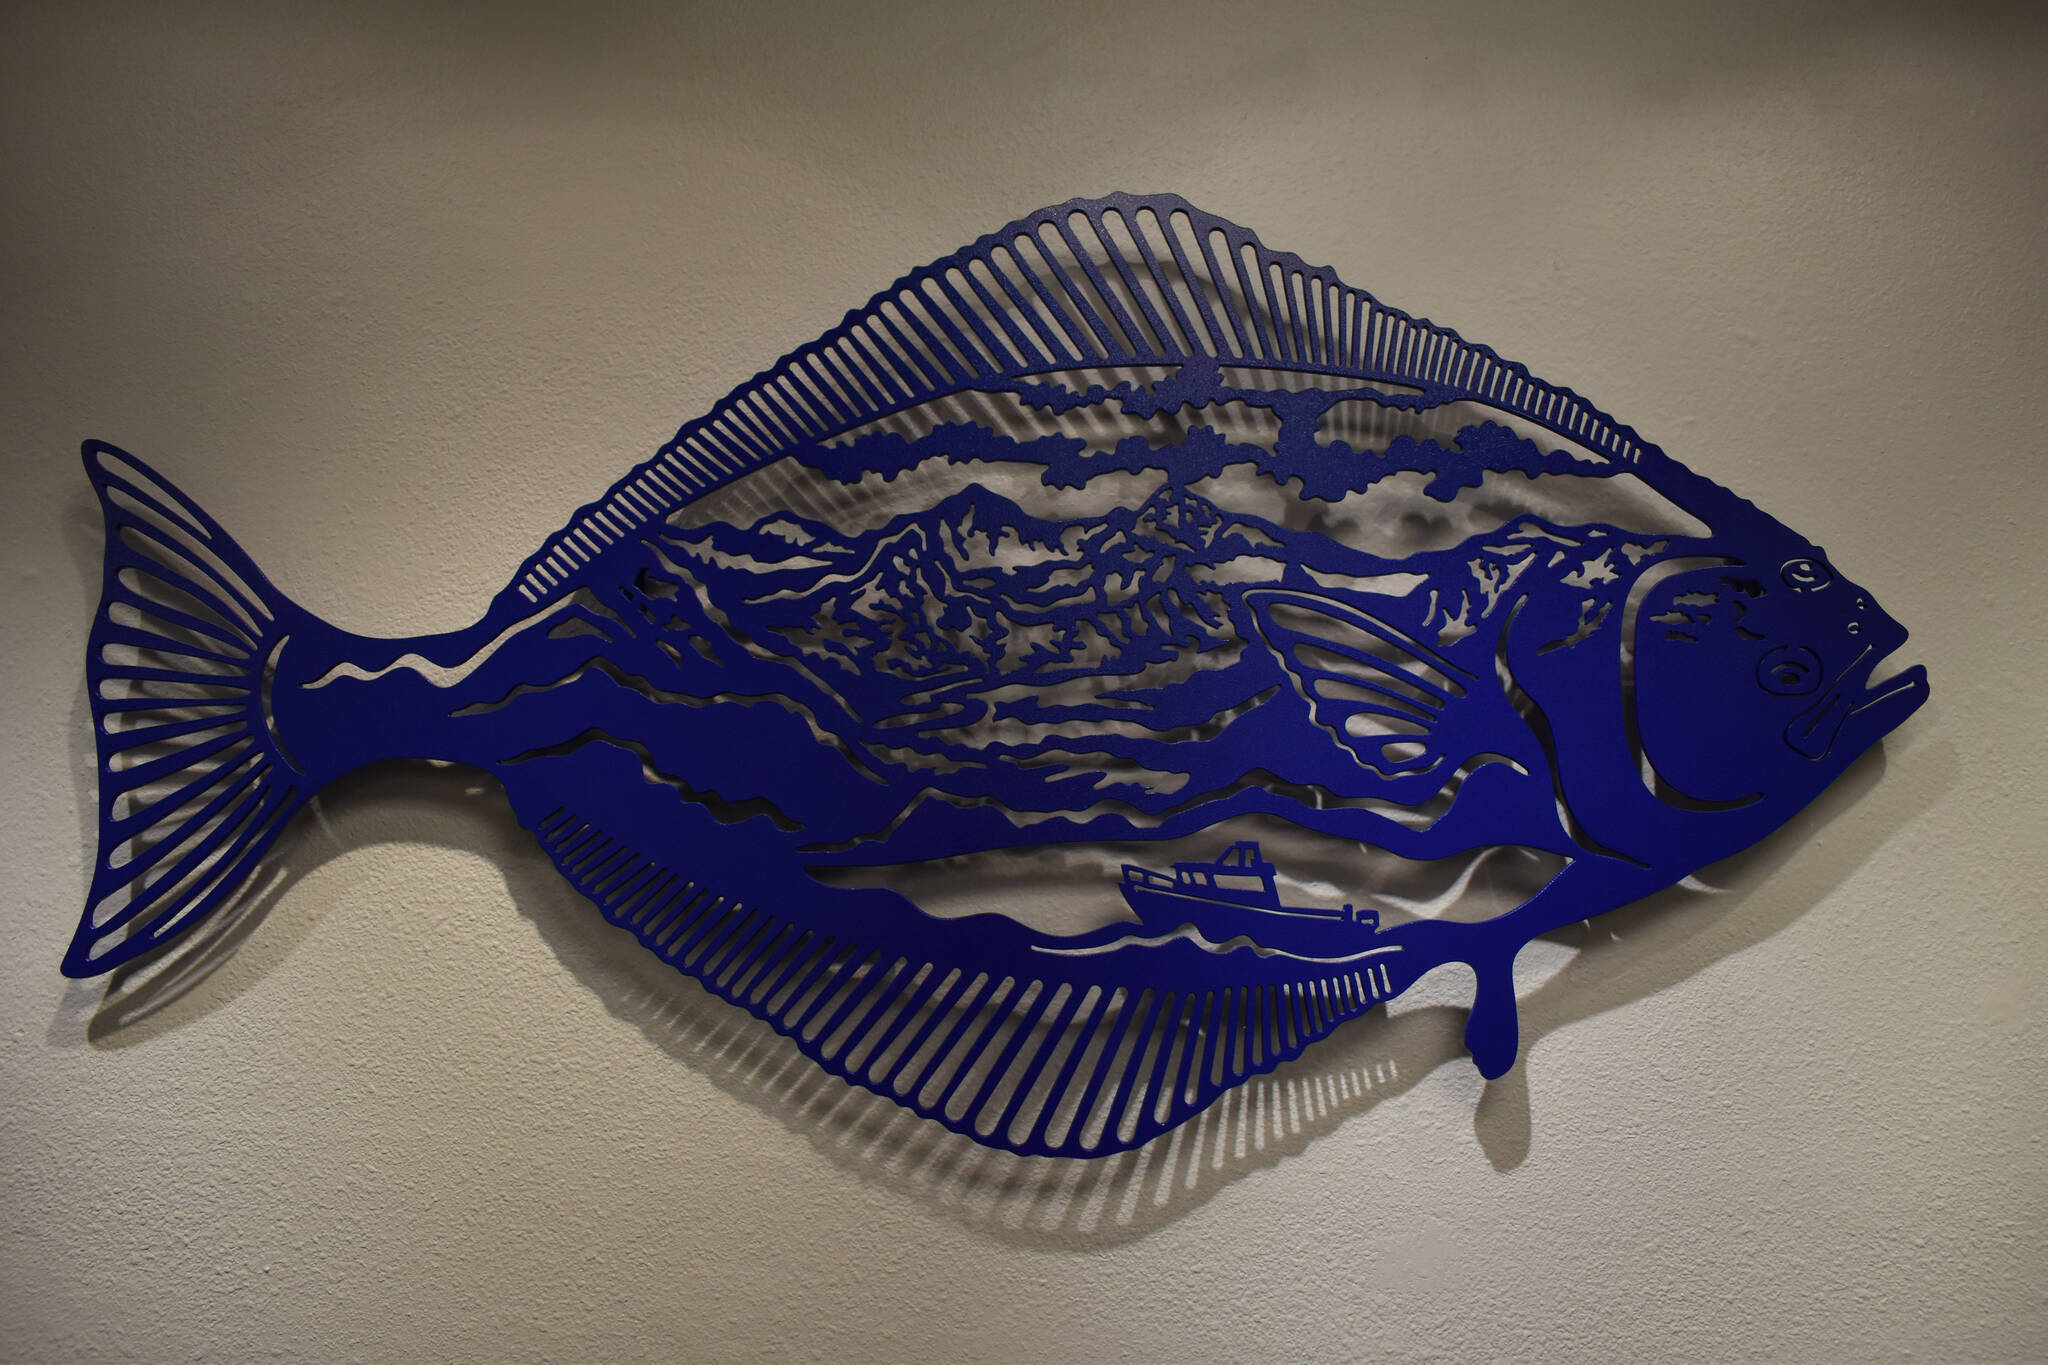 A metal halibut containing a mountain range seen from the Homer Spit, created by Chelline Larsen, hangs Tuesday, Jan. 31, 2023, at the Kenai Art Center, in Kenai, Alaska, as part of Metalwork & Play. (Jake Dye/Peninsula Clarion)